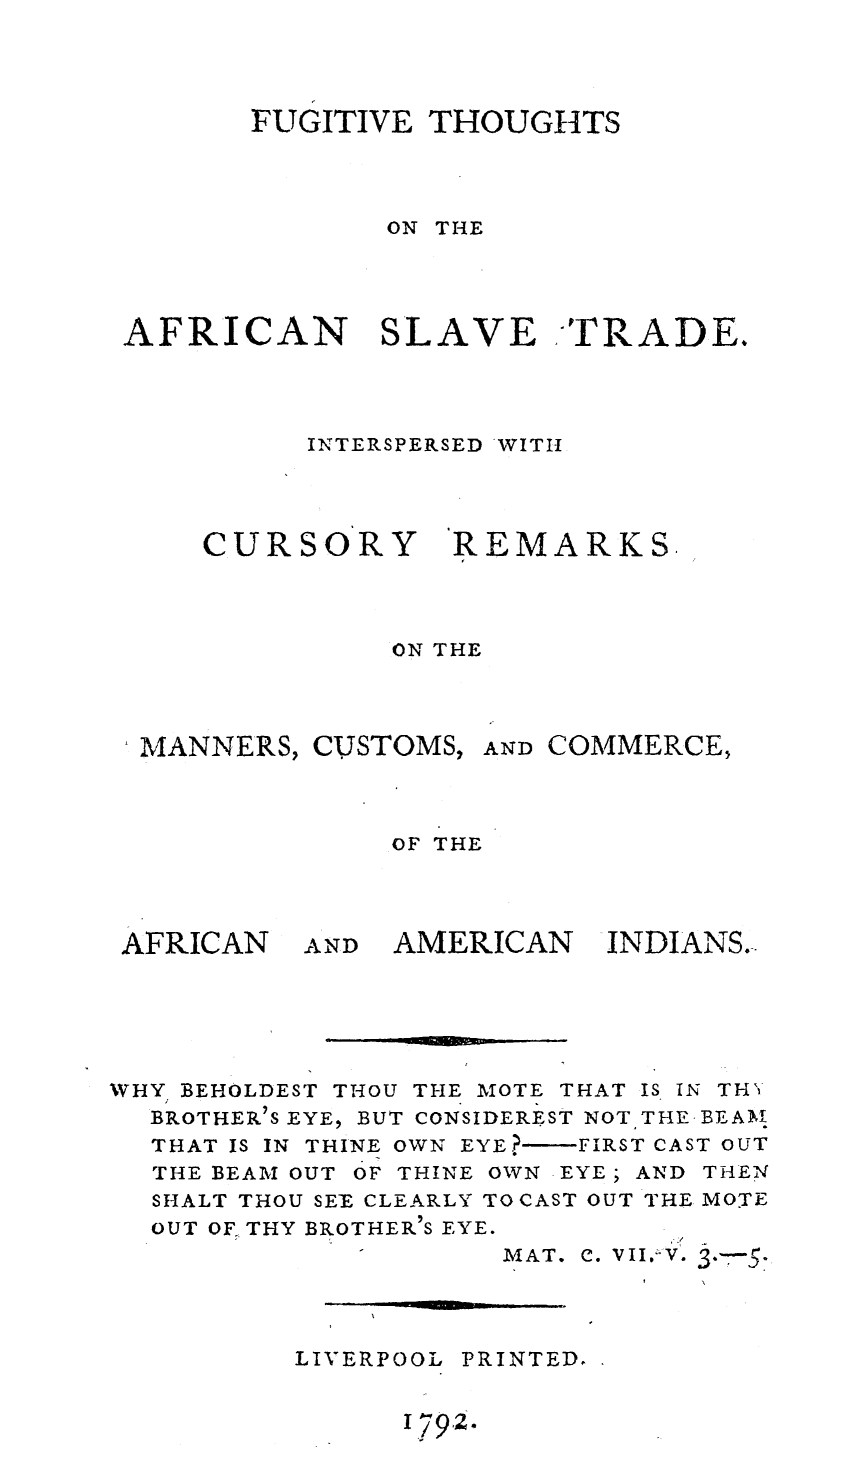 handle is hein.amindian/futhafslvt0001 and id is 1 raw text is: 




       FUGITIVE THOUGHTS



              ON THE




AFRICAN SLAVE TRADE.




          INTERSPERSED 'WITII


CURSORY


REMARKS.


              ON THE



MANNERS, CUSTOMS, AND COMMERCE,



              OF THE


AFRICAN


AND AMERICAN


INDIANS.


WHY BEHOLDEST THOU THE TOTE THAT IS IN THU
  BROTHER'7S EYE, BUT CONSIDEREST NOT THE BEAMl
  THAT IS IN THINE OWN EYE?-FIRST CAST OUT
  THE BEAM OUT OF THINE OWN EYE; AND THEN
  SHALT THOU SEE CLEARLY TO CAST OUT THE MOTE
  OUT OF, THY BROTHER'S EYE.
                     MAT. C. VII. V.


LIVERPOOL


PRINTED,


1.792.


